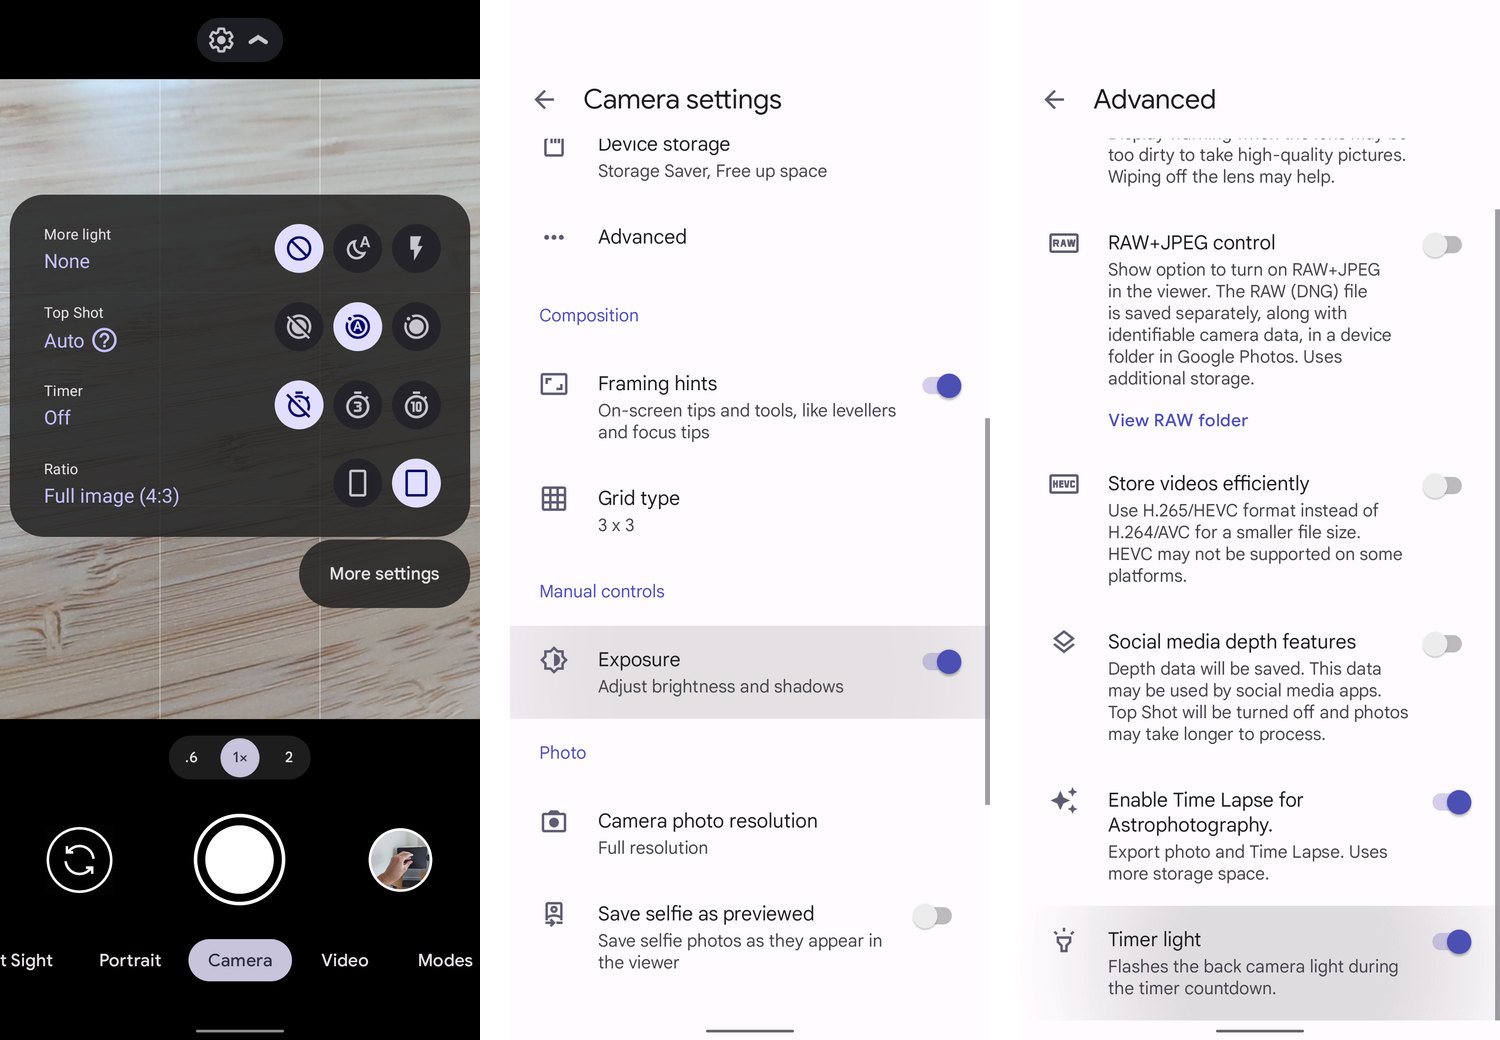 Google Camera update brings Timer light, optional exposure controls and